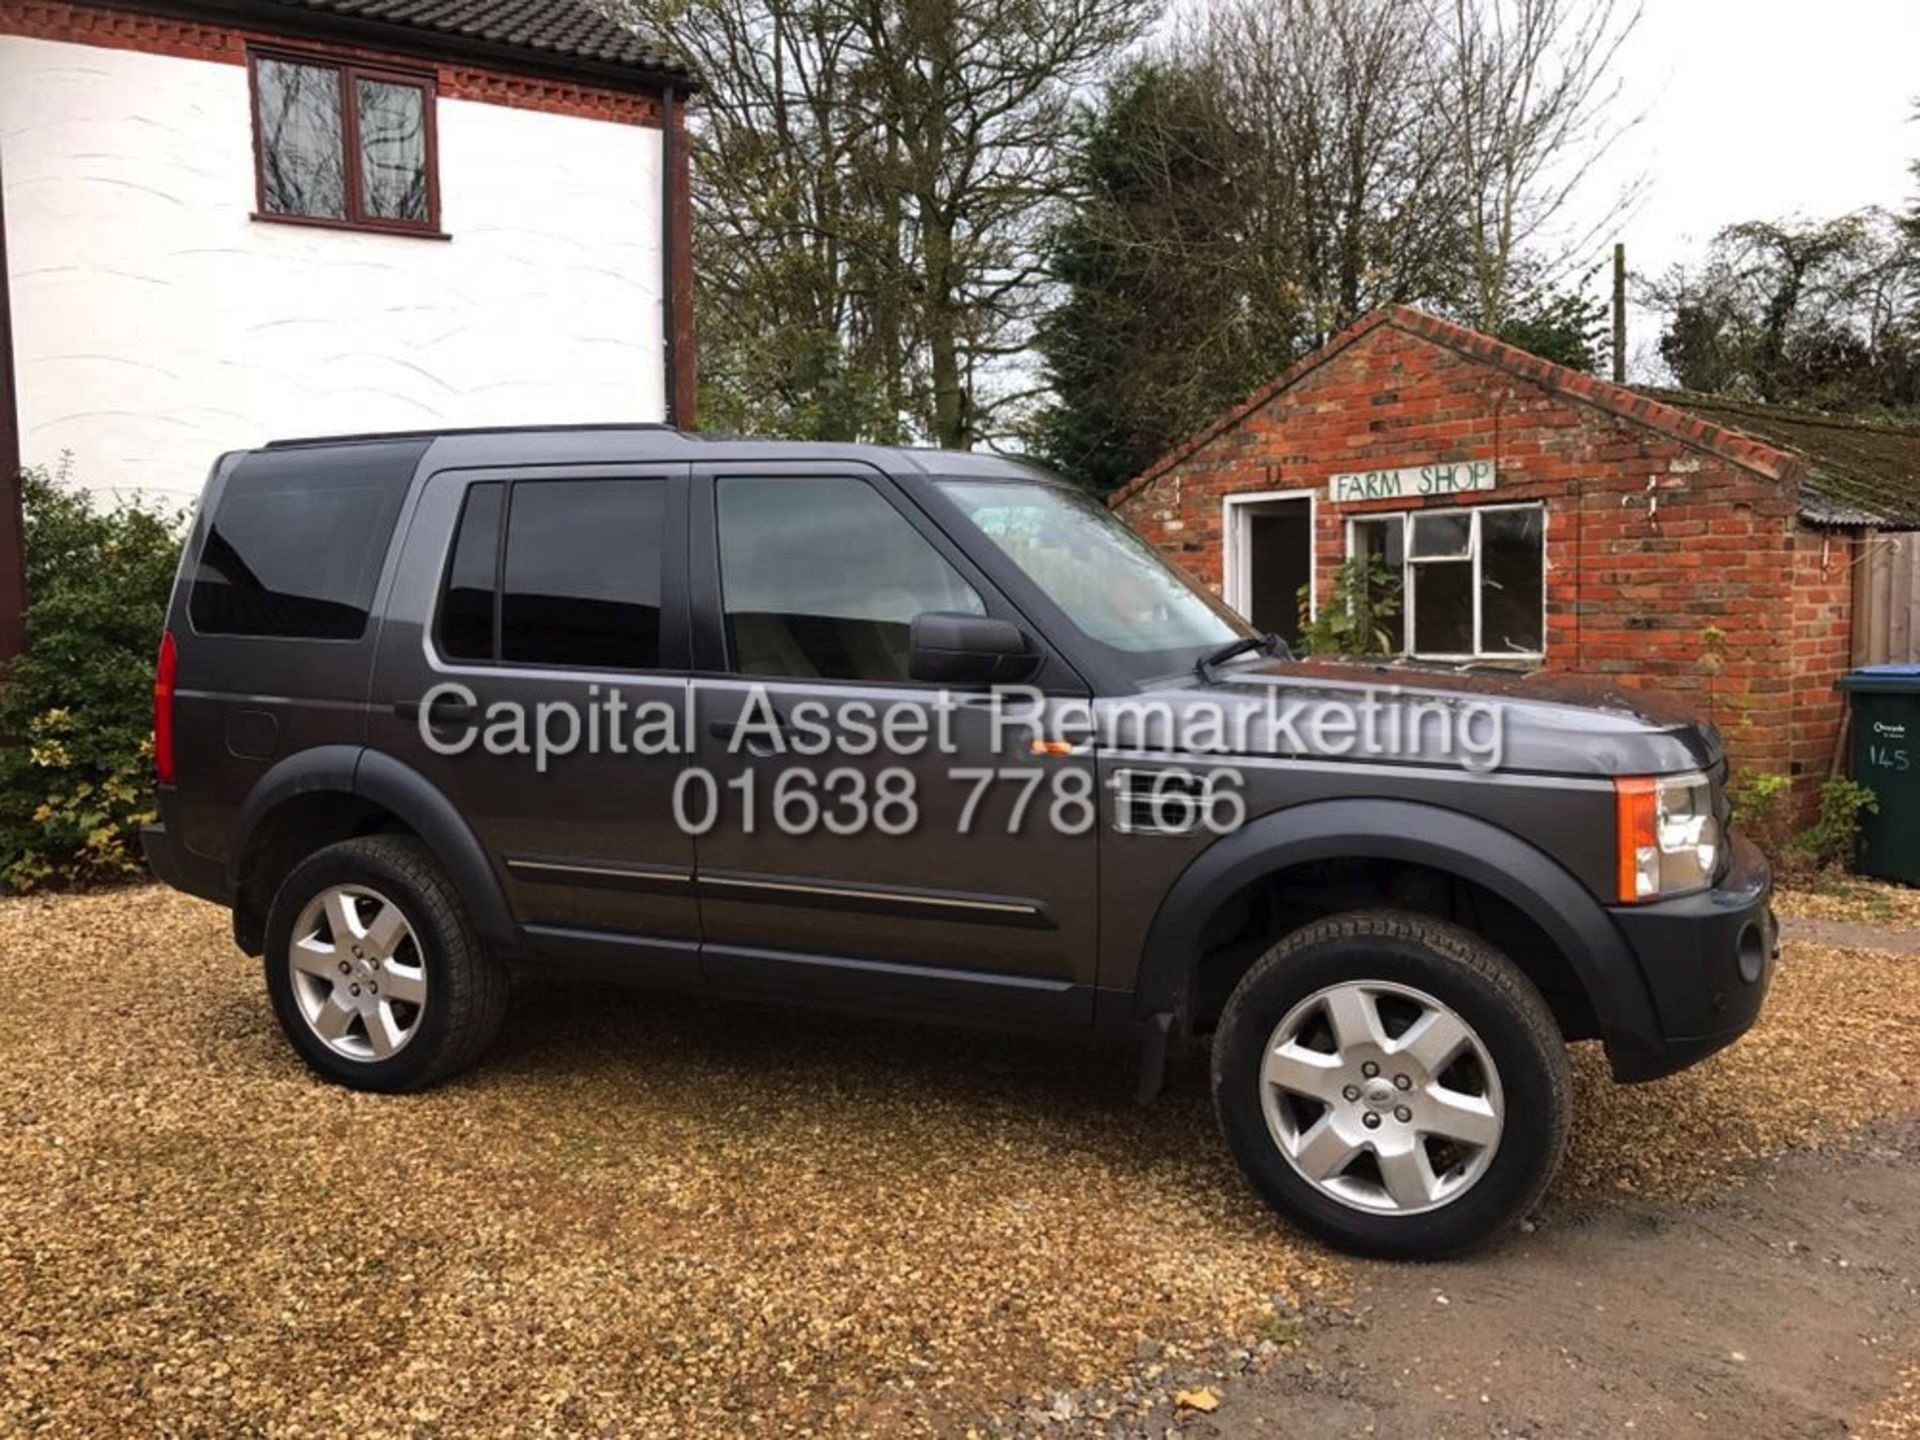 LAND ROVER DISCOVERY 3 "HSE" AUTO (2006 MODEL) FULLY LOADED - SAT NAV - LEATHER - GLASS ROOF(NO VAT)